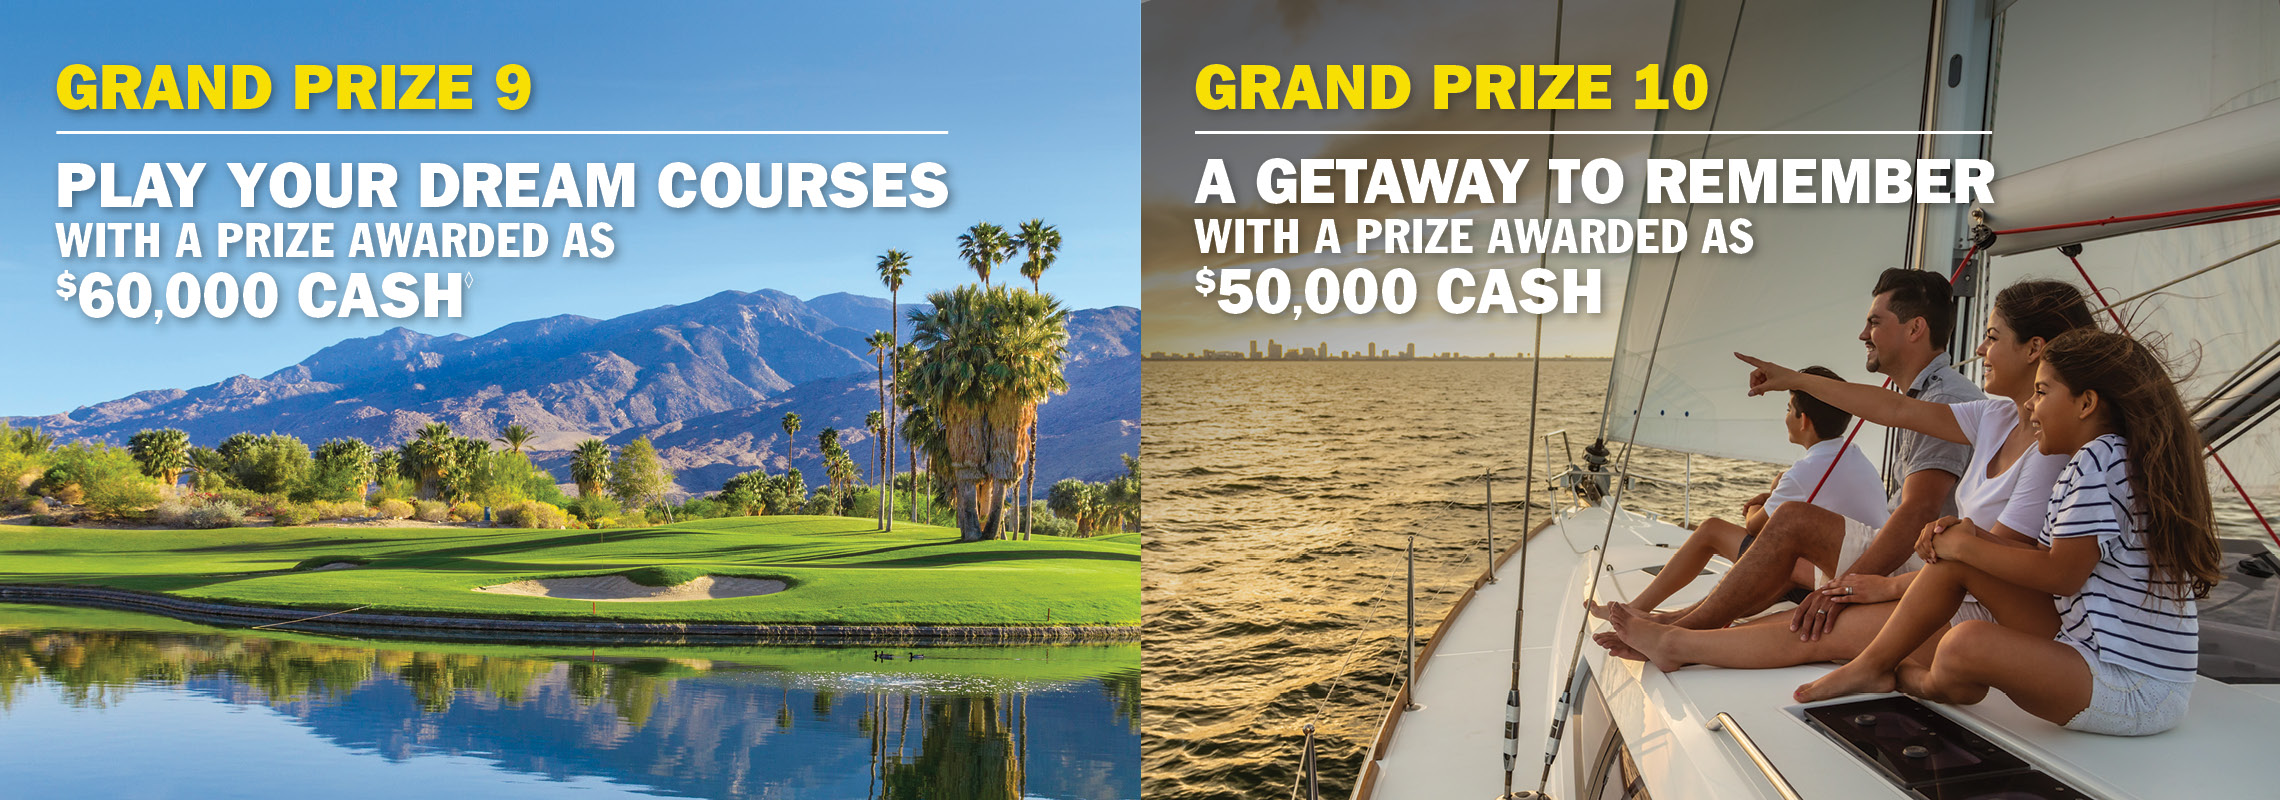 Grand Prize 9 - Forest River Cherokee or choose $52,000 cash. Grand Prize 10 - Build your perfect escape with $50,000 cash.